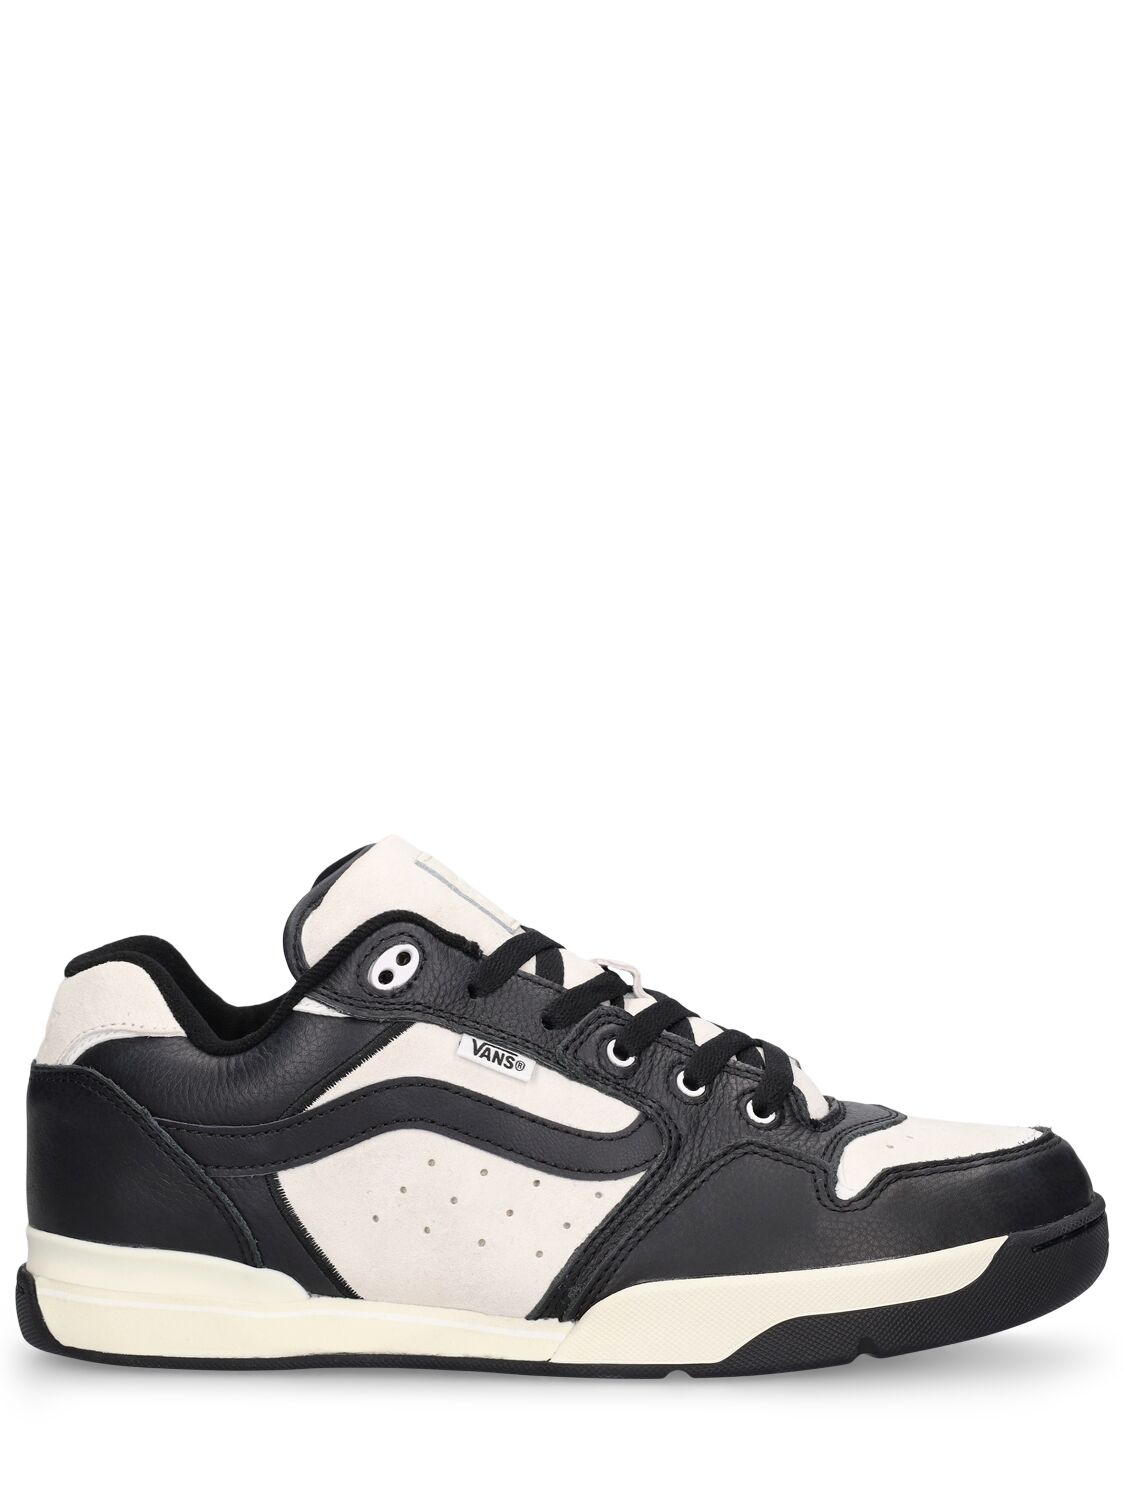 Image of Rowley Xlt Sneakers